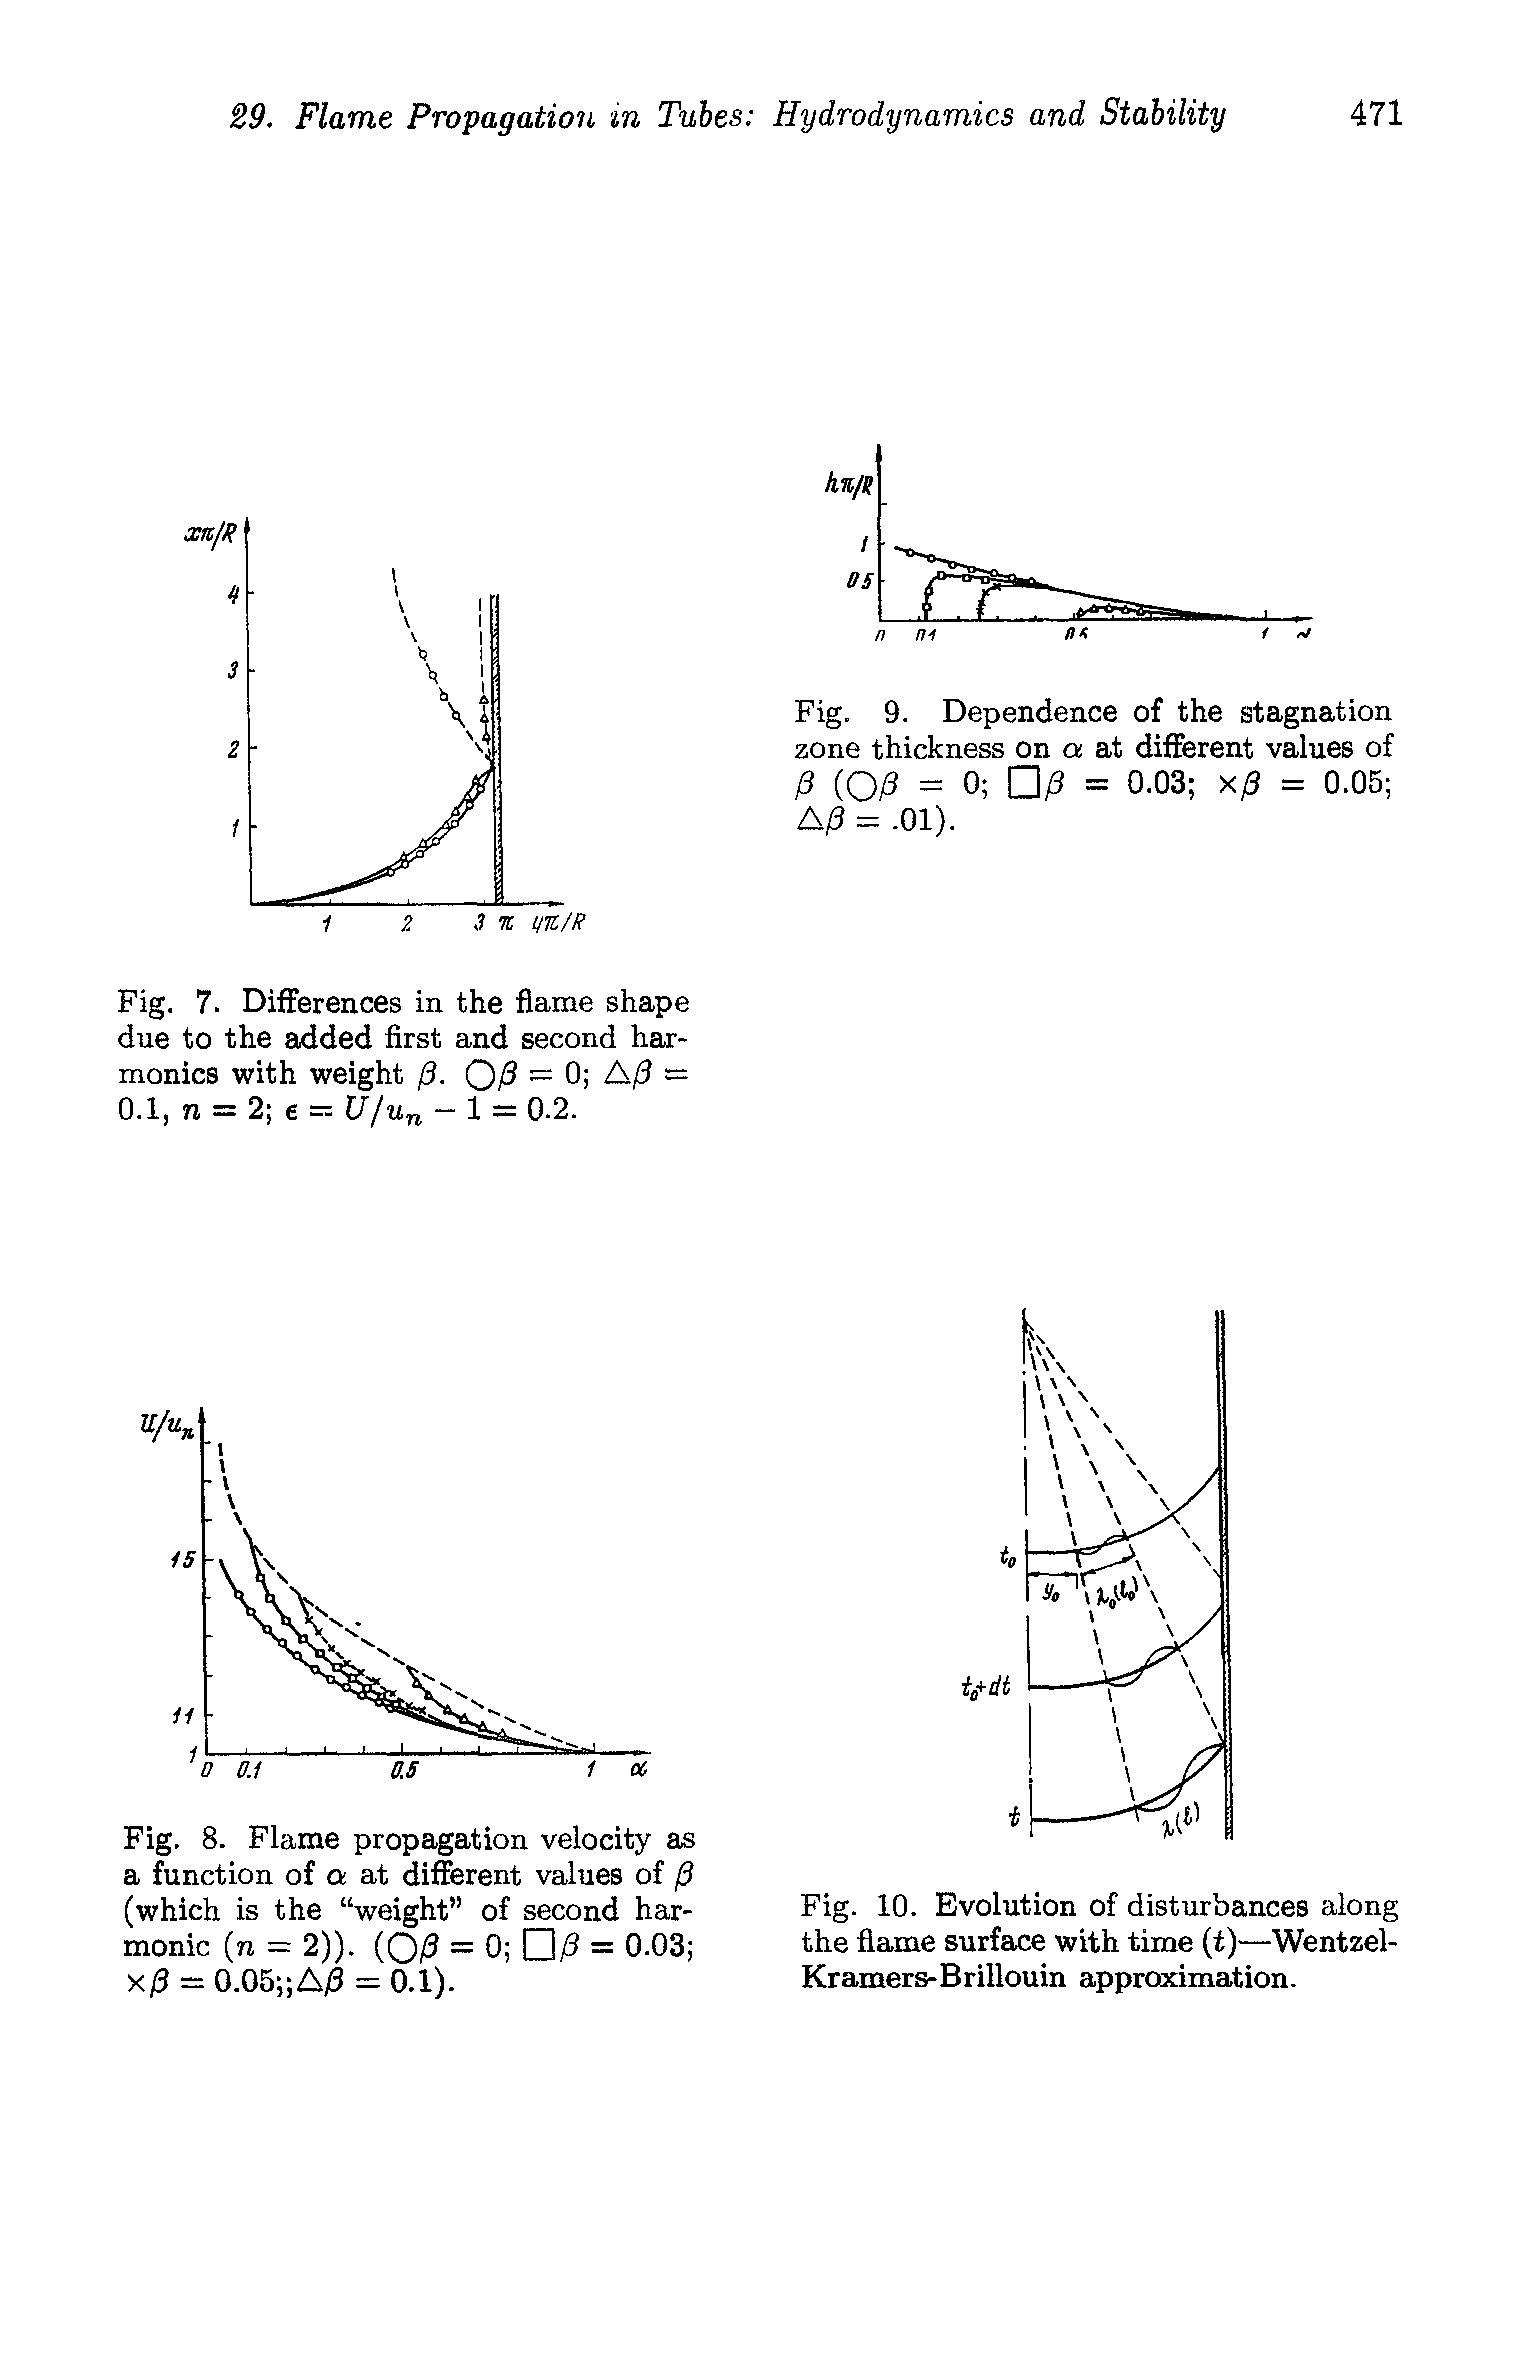 Fig. 10. Evolution of disturbances along the flame surface with time (i)—Wentzel-Kramers-Brillouin approximation.